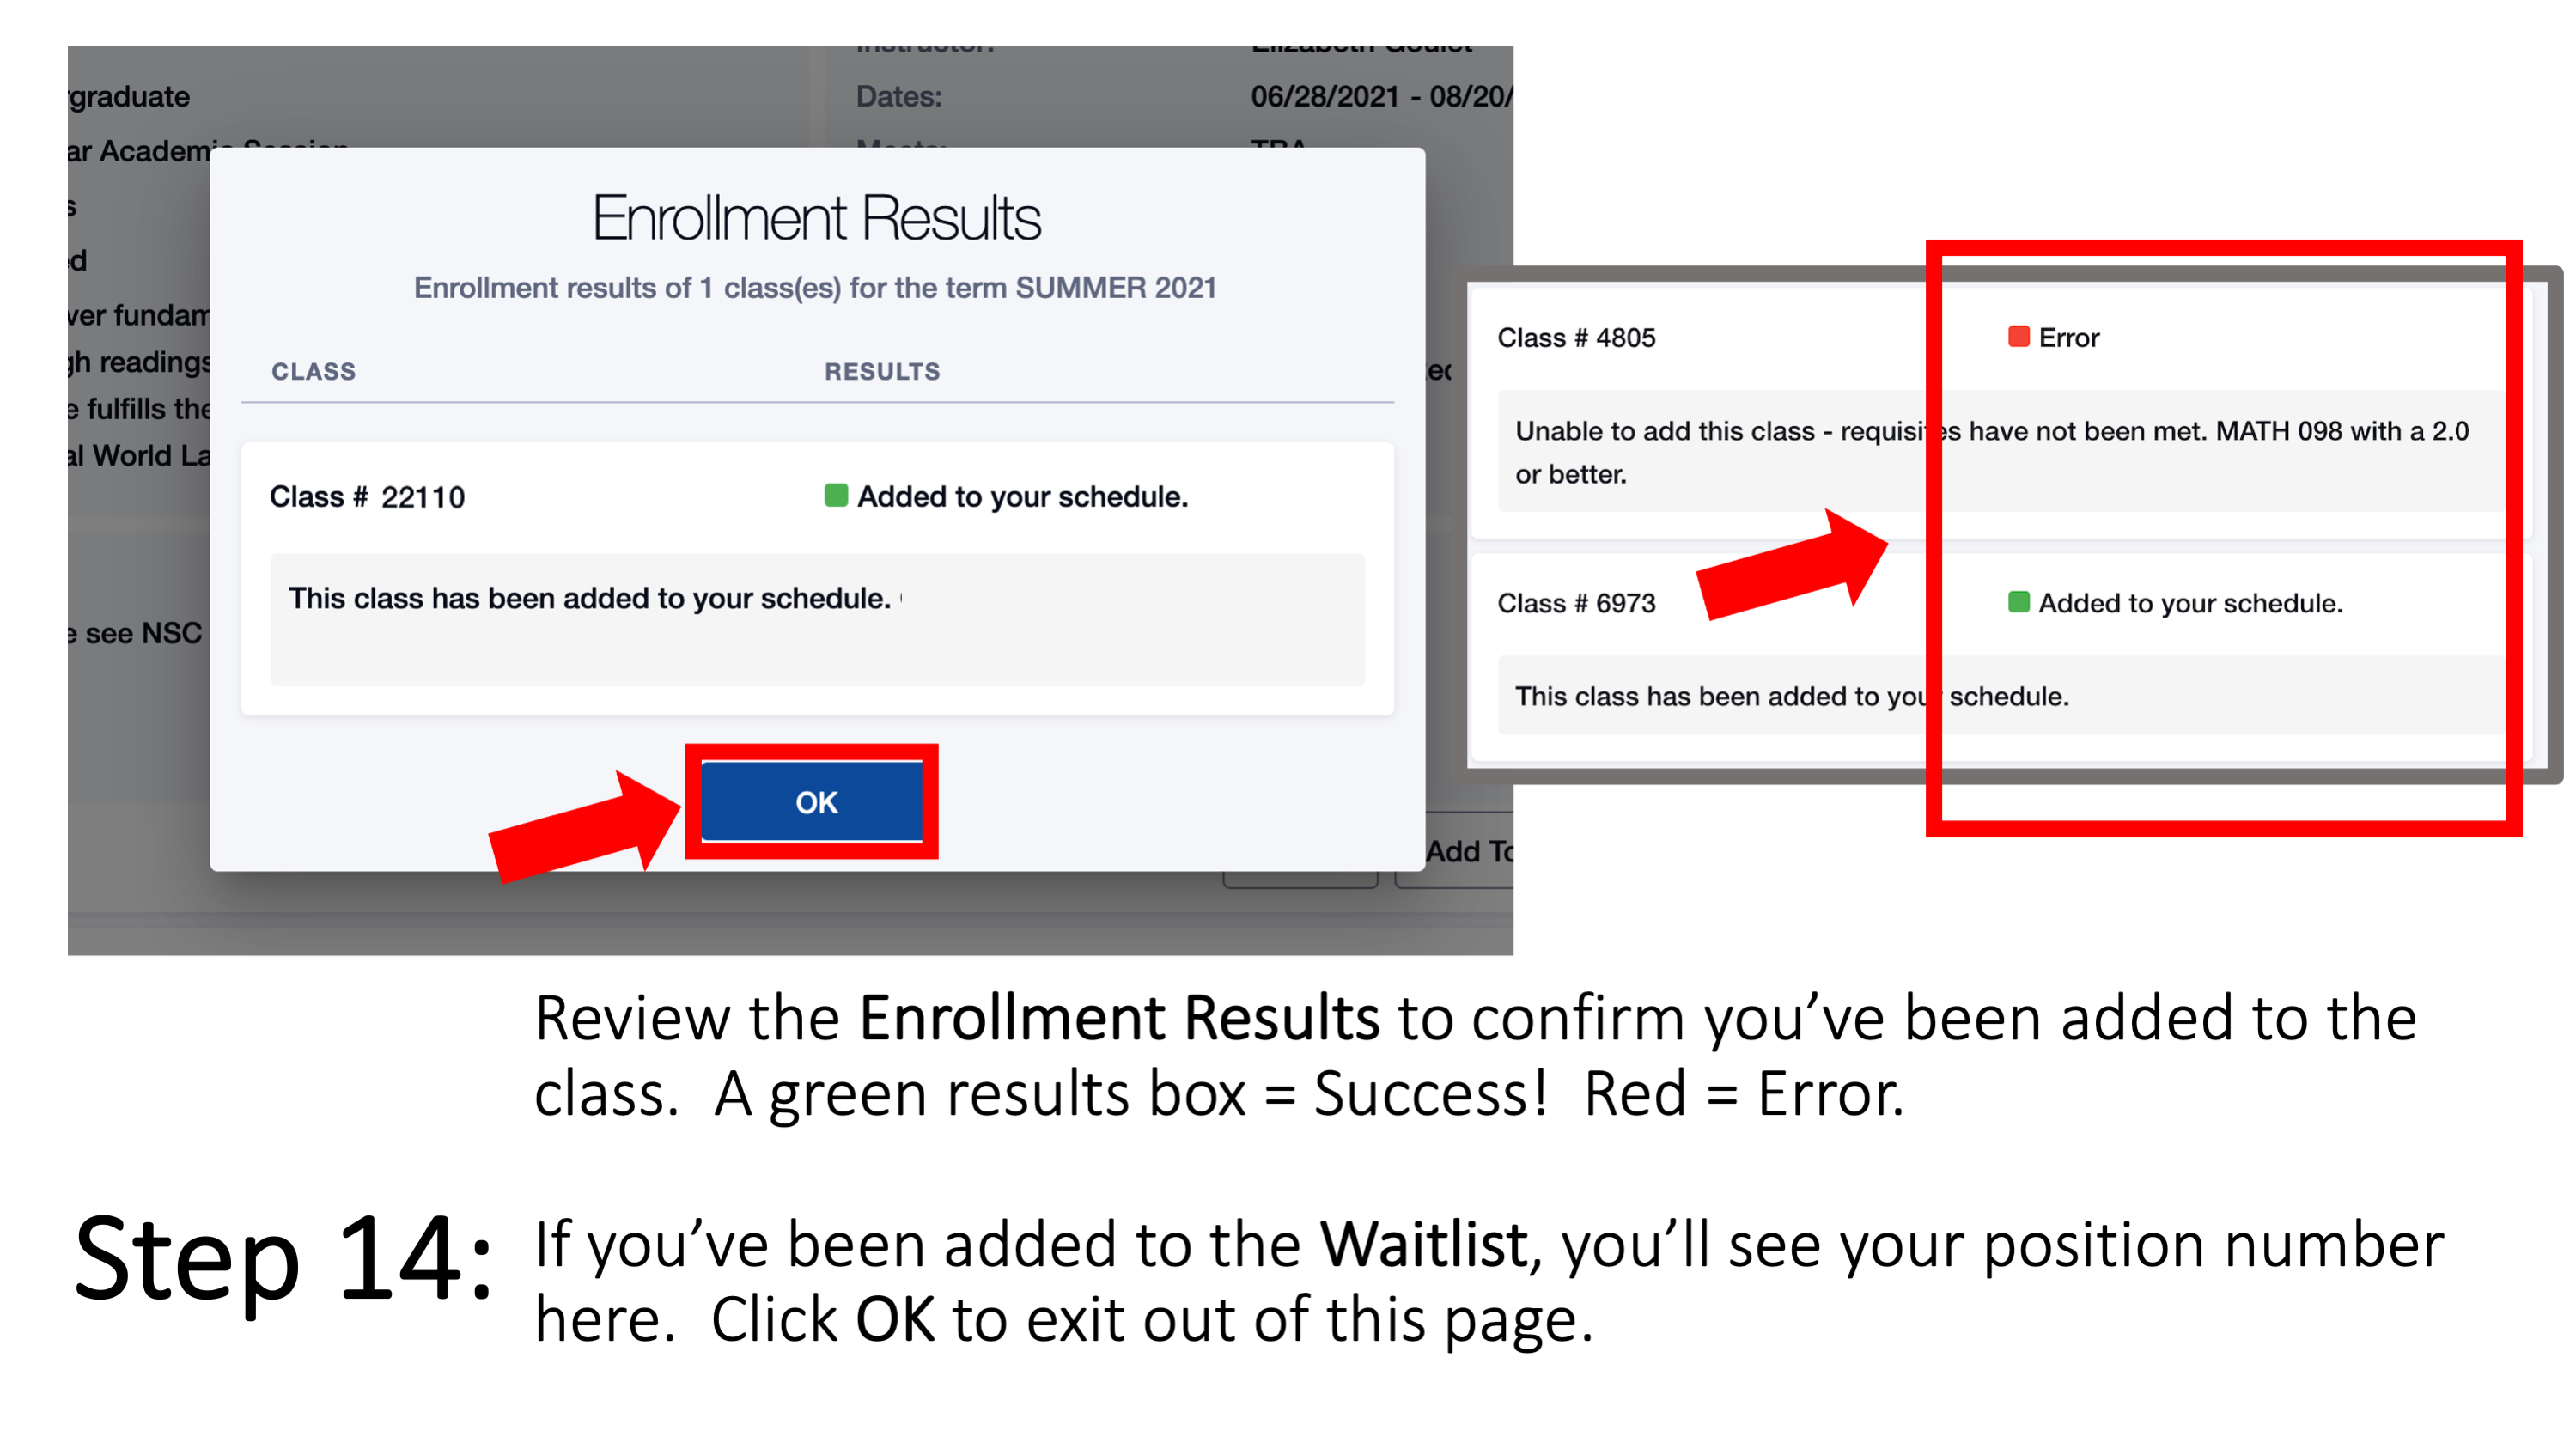 Step 14: Review the Enrollment Results to confirm you’ve been added to the class. A green results box = Success! Red = Error. If you’ve been added to the Waitlist, you’ll see your position number here. Click OK to exit out of this page.